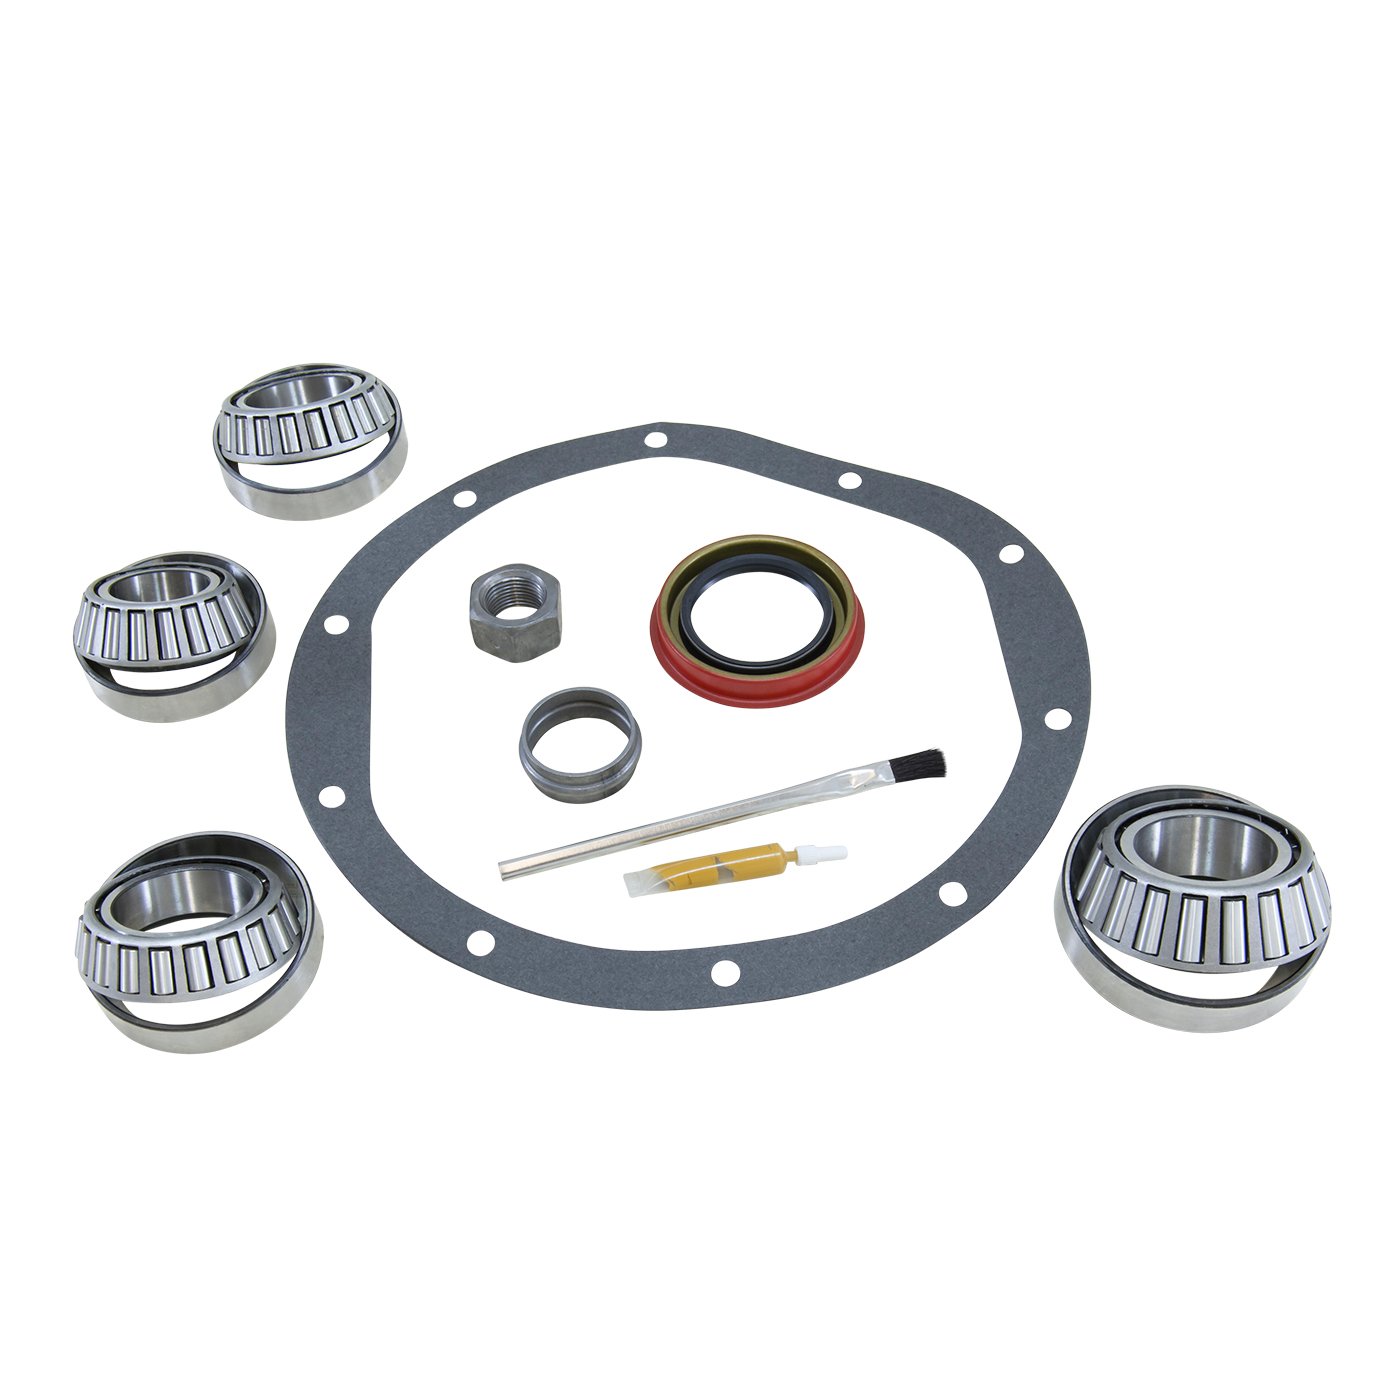 Bearing Installation Kit For GM 8.5" Front Differential